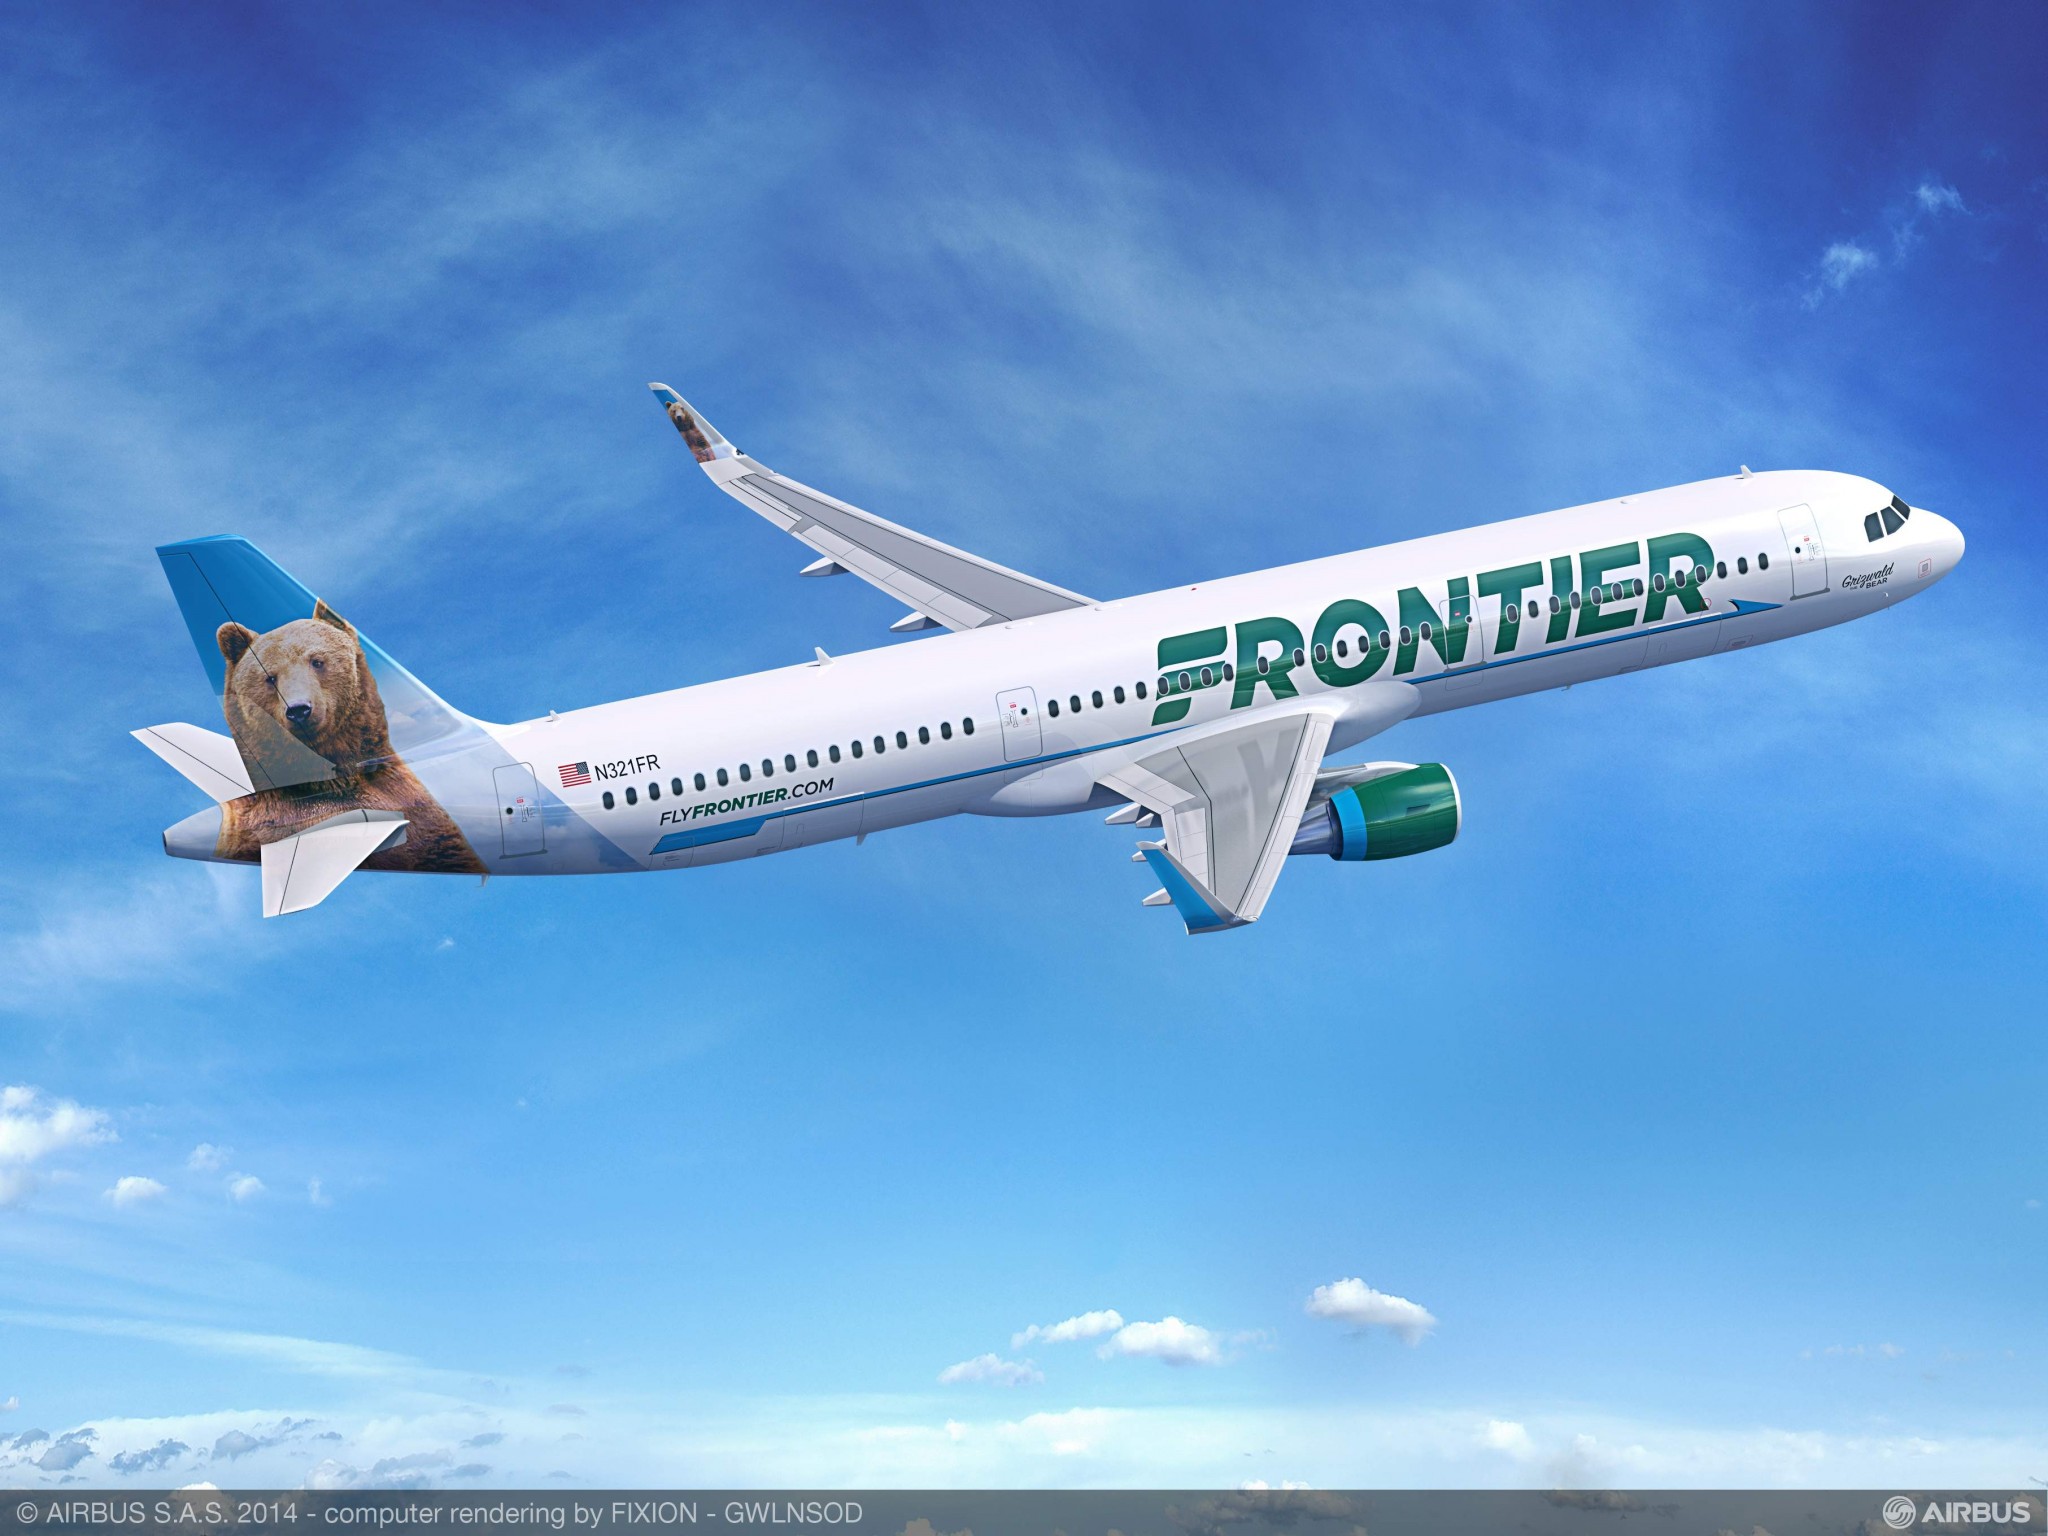 Frontier announces five new routes from Phoenix